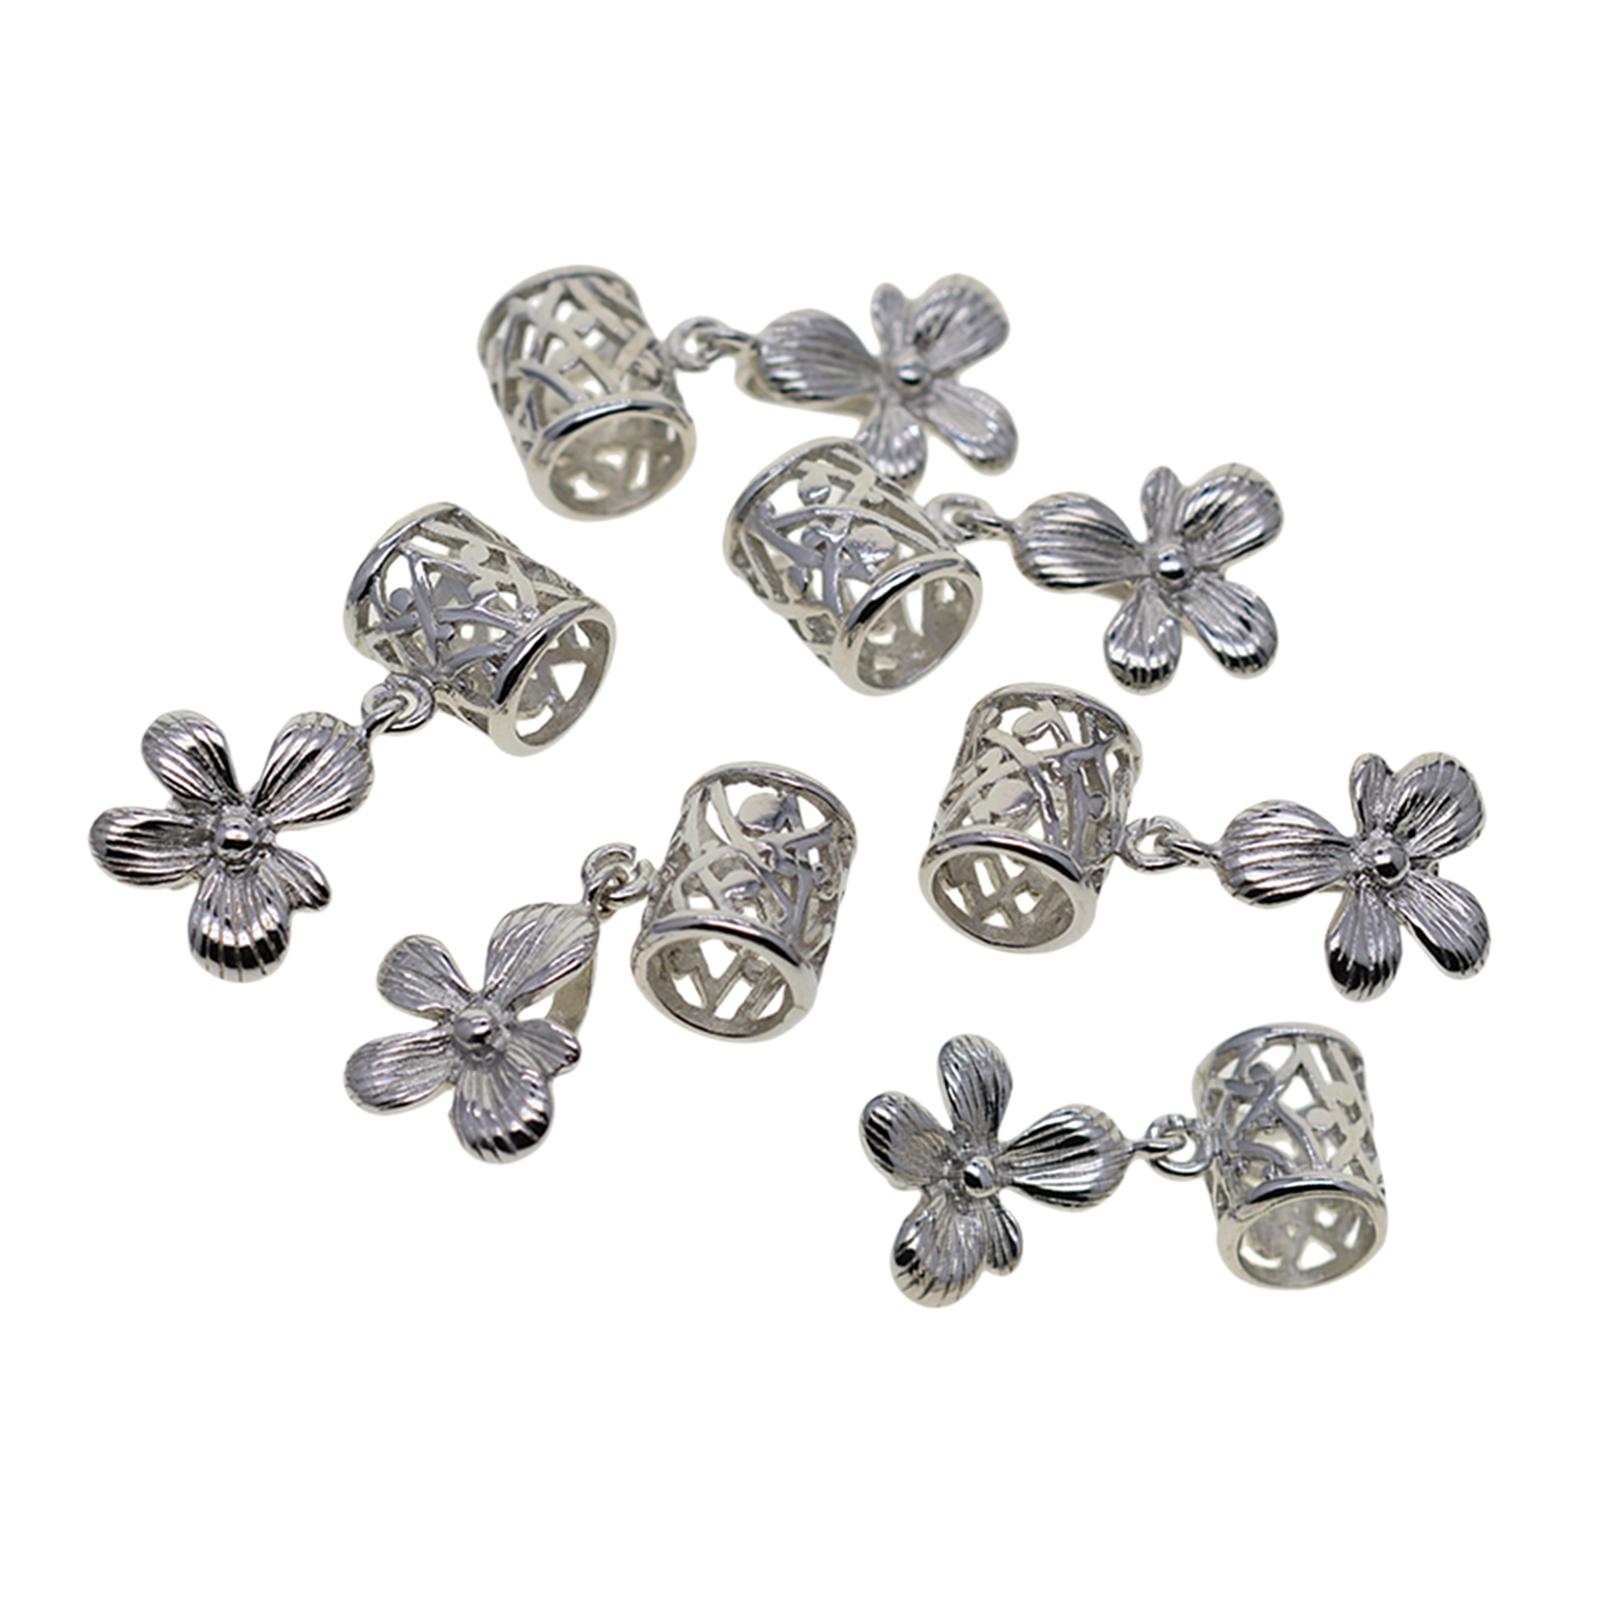 6X Metal Pinch Bails Pinch Clips Clasps Bead Hanger Links Filigree Pinch Clips for Jewelry Making Buckles Charms Holder Dangle Bracelet DIY, Women's